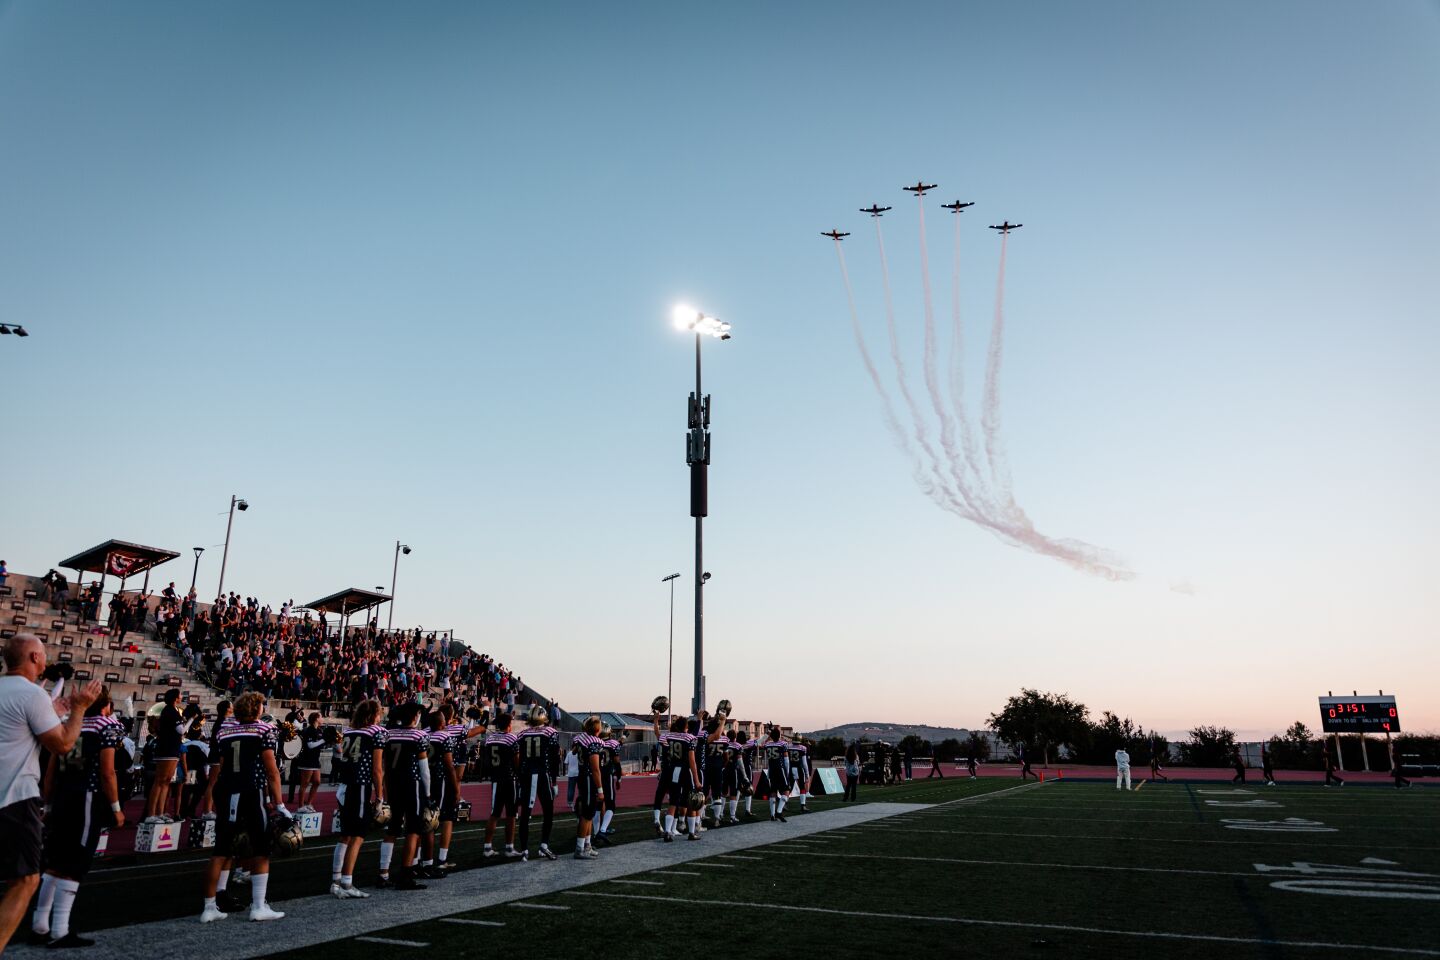 The 5 Beechcraft T34 Mentor planes flew by the Del Norte High stadium at an altitude of 800 feet. They performed for 6 minutes.